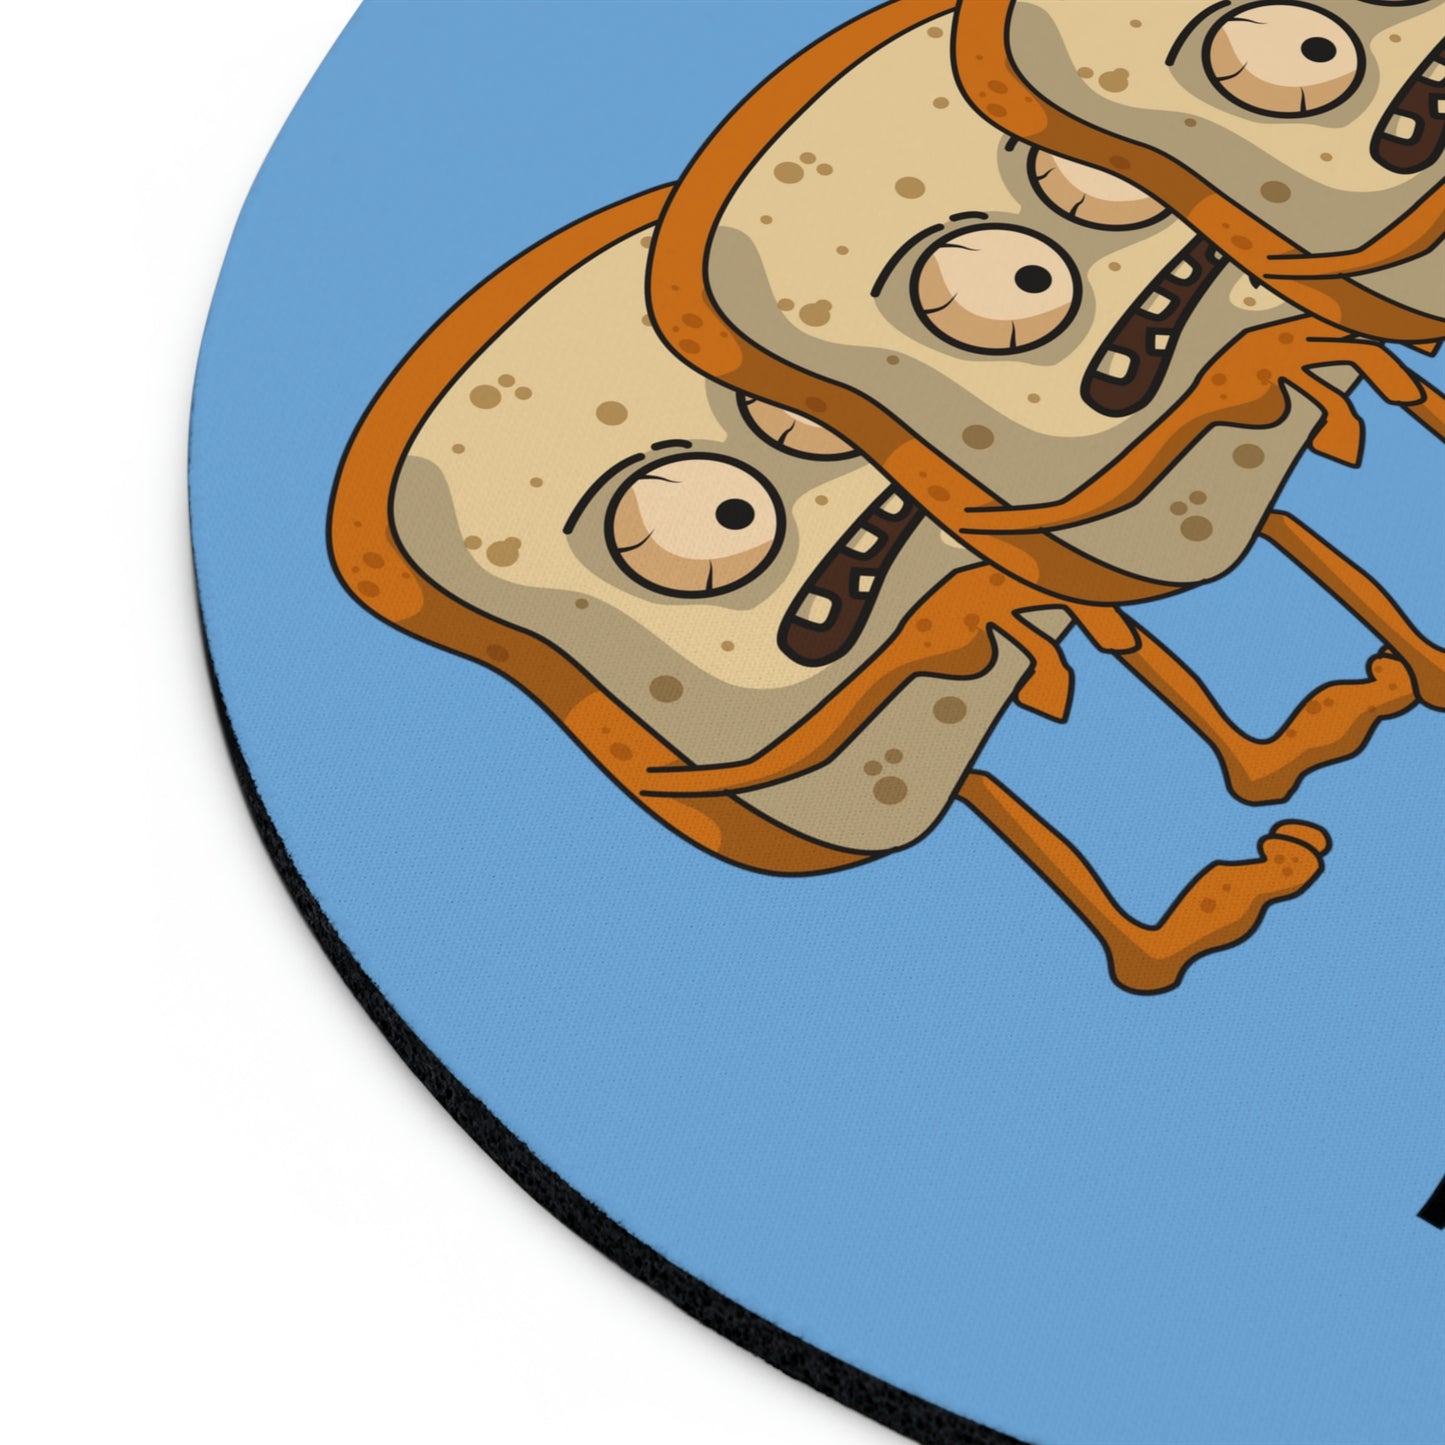 The Walking Bread- Mouse Pad